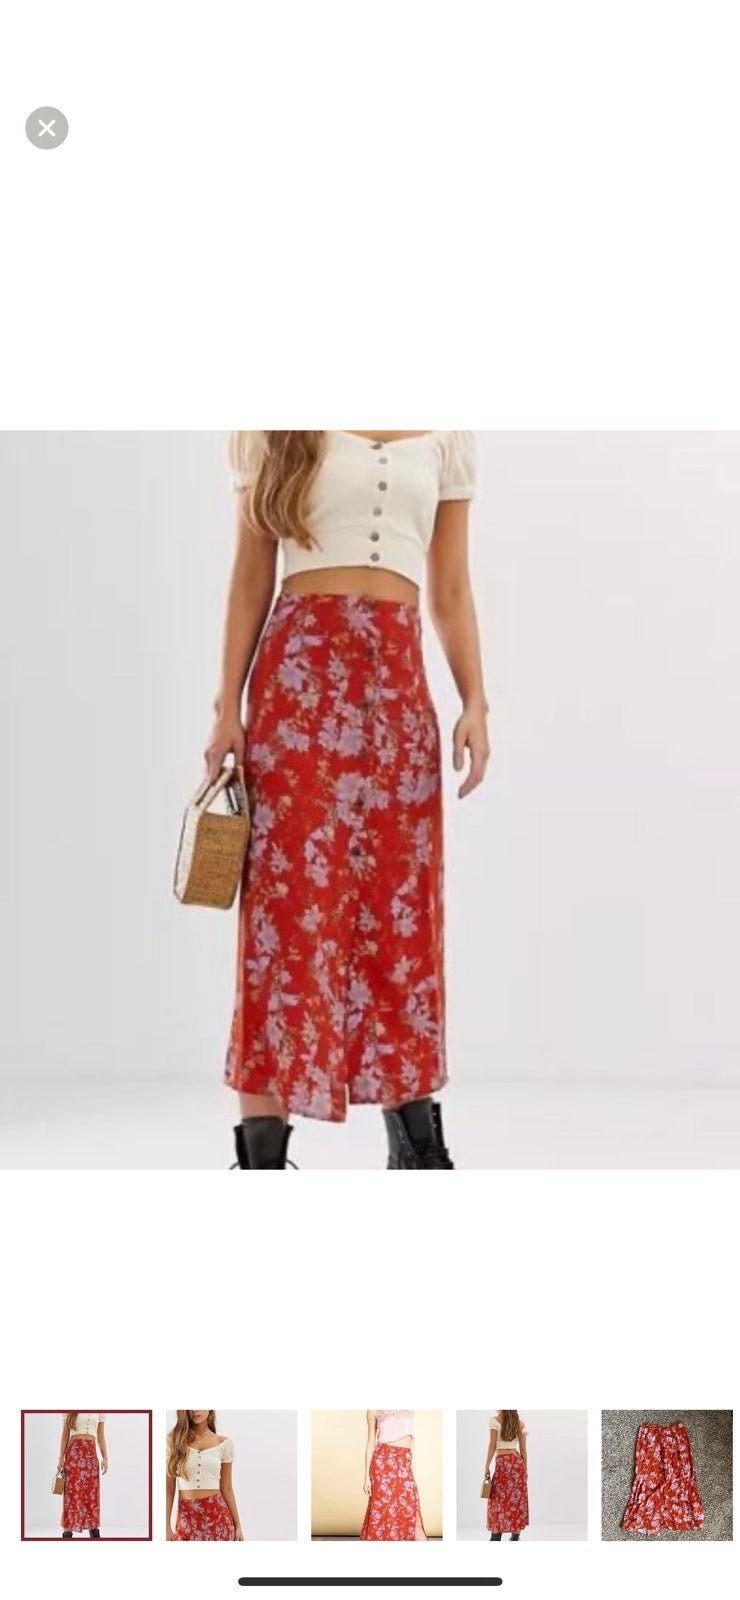 Authentic FREE PEOPLE Size 10 RETRO LOVE SIDE BUTTON SLIT PRINTED FLORAL MIDI SKIRT RED fSzRLo0Pz online store